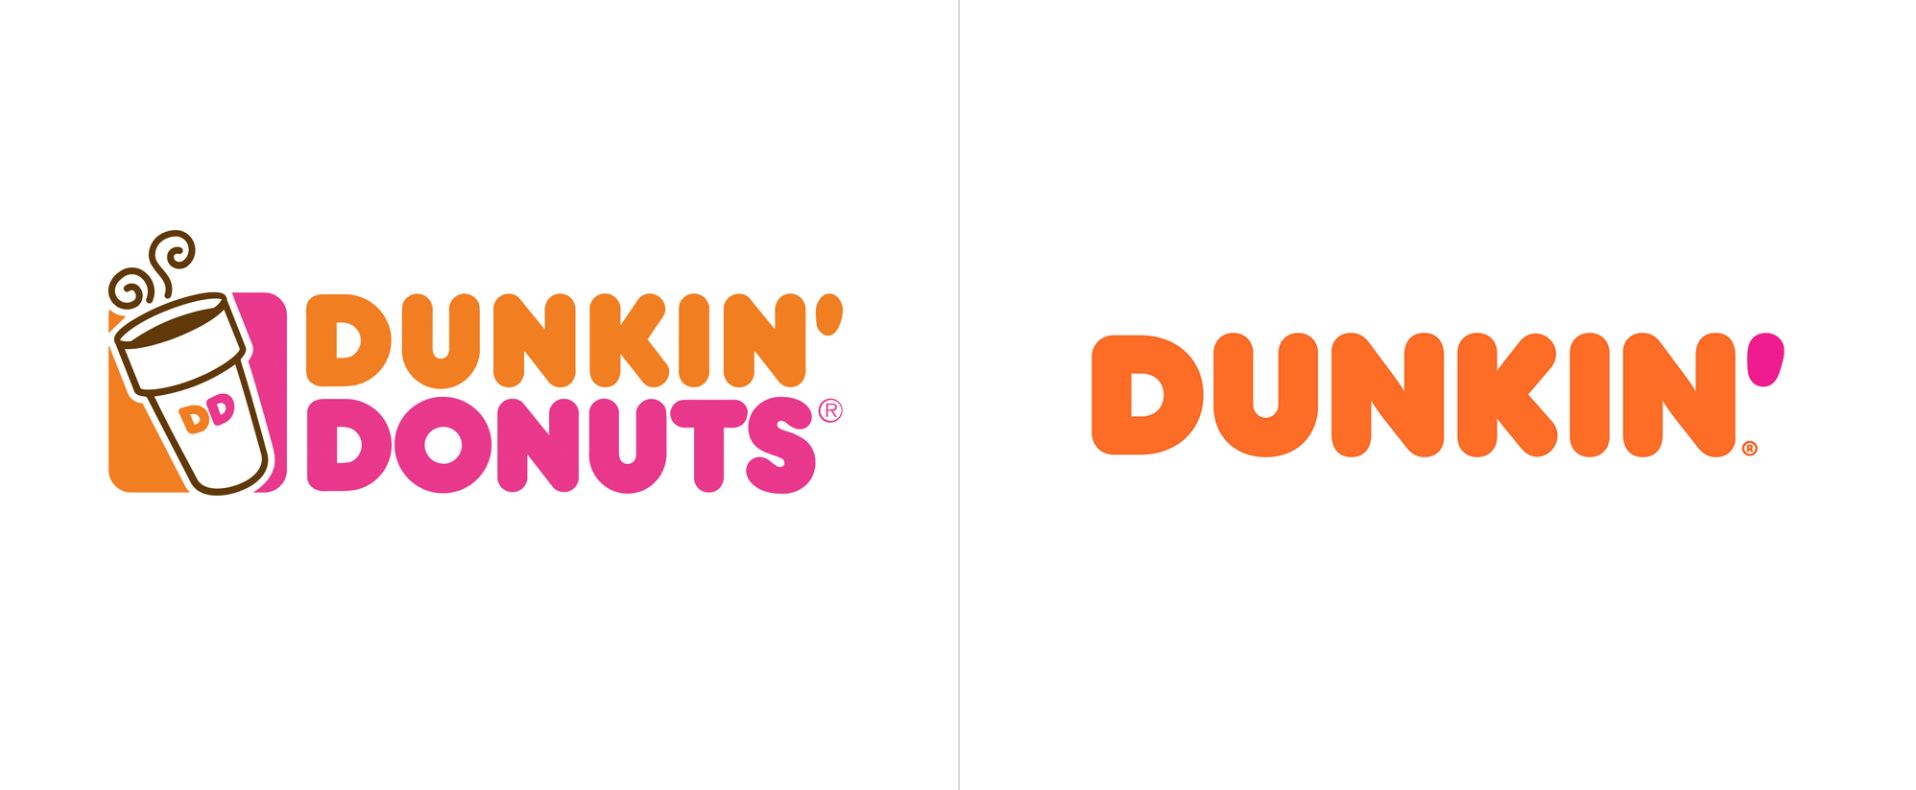 dunkin donuts old and new brand